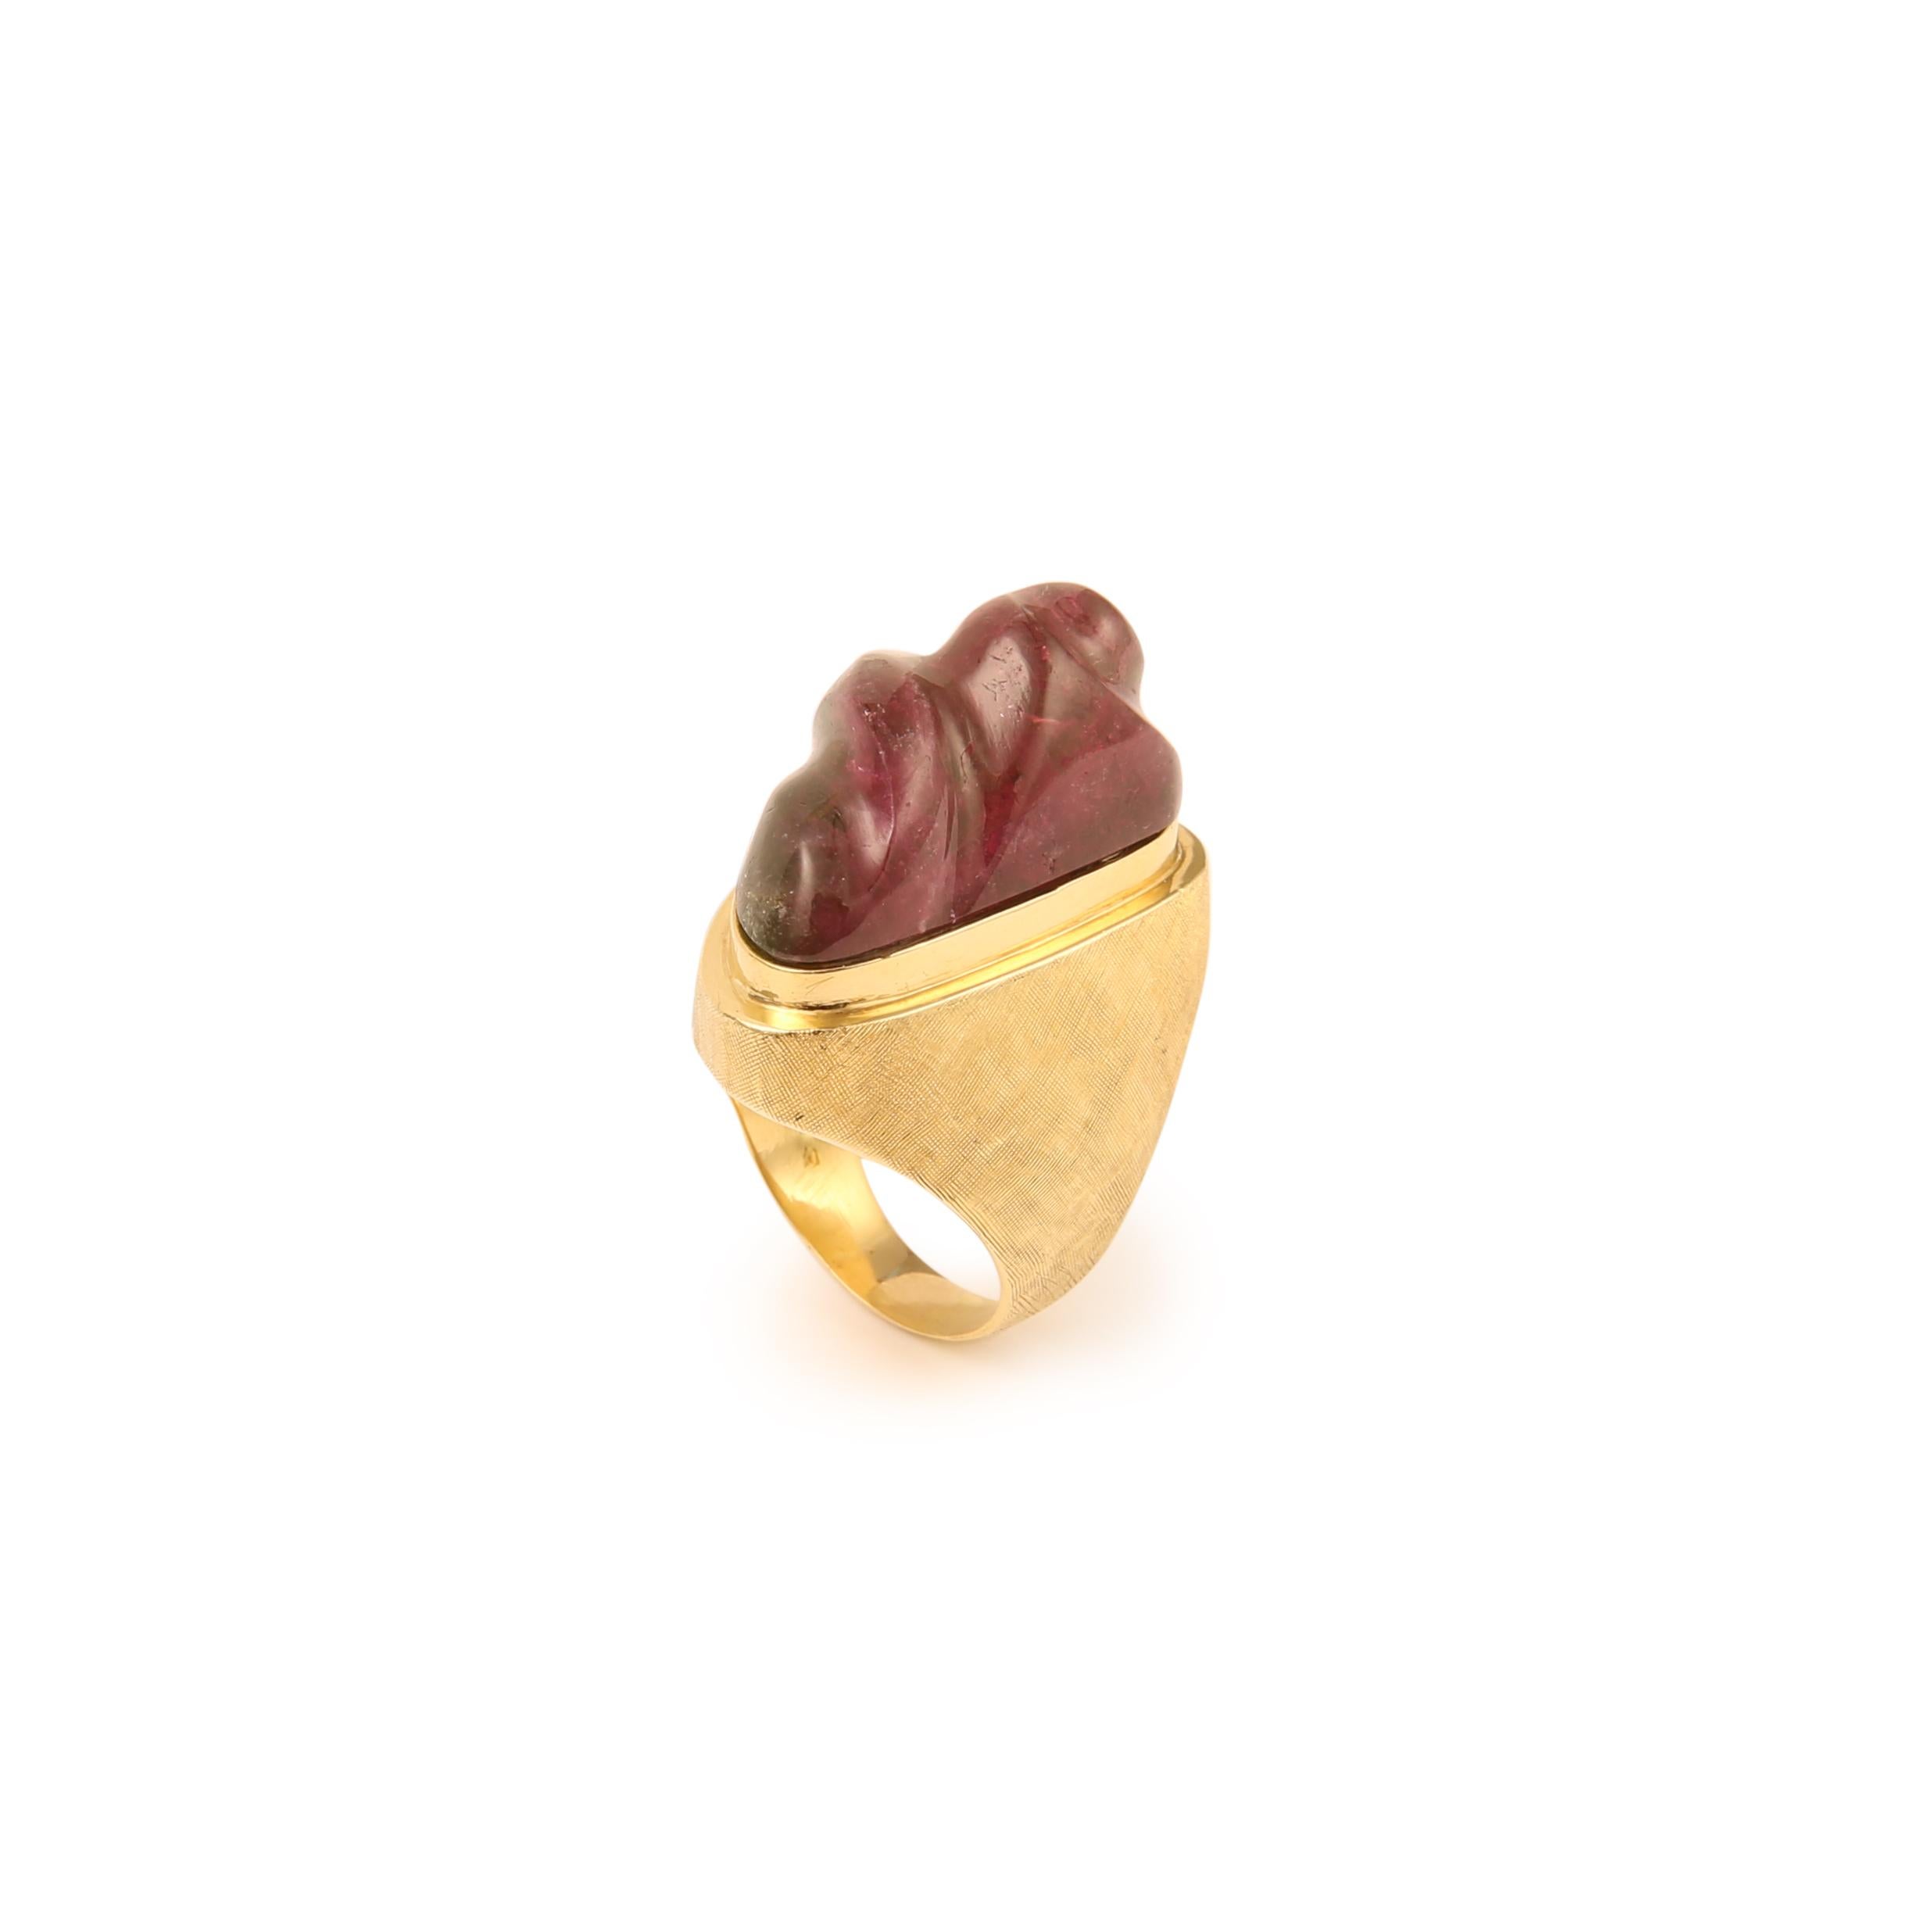 Important cocktail ring in brushed yellow gold set with an imposing cabochon of watermelon tourmaline carved in the shape of a conch attributed to Roberto Burle-Marx.

Some micro-blemishes on the cabochon.

Ring's dimensions: 27.55 x 17.74 x 17.20